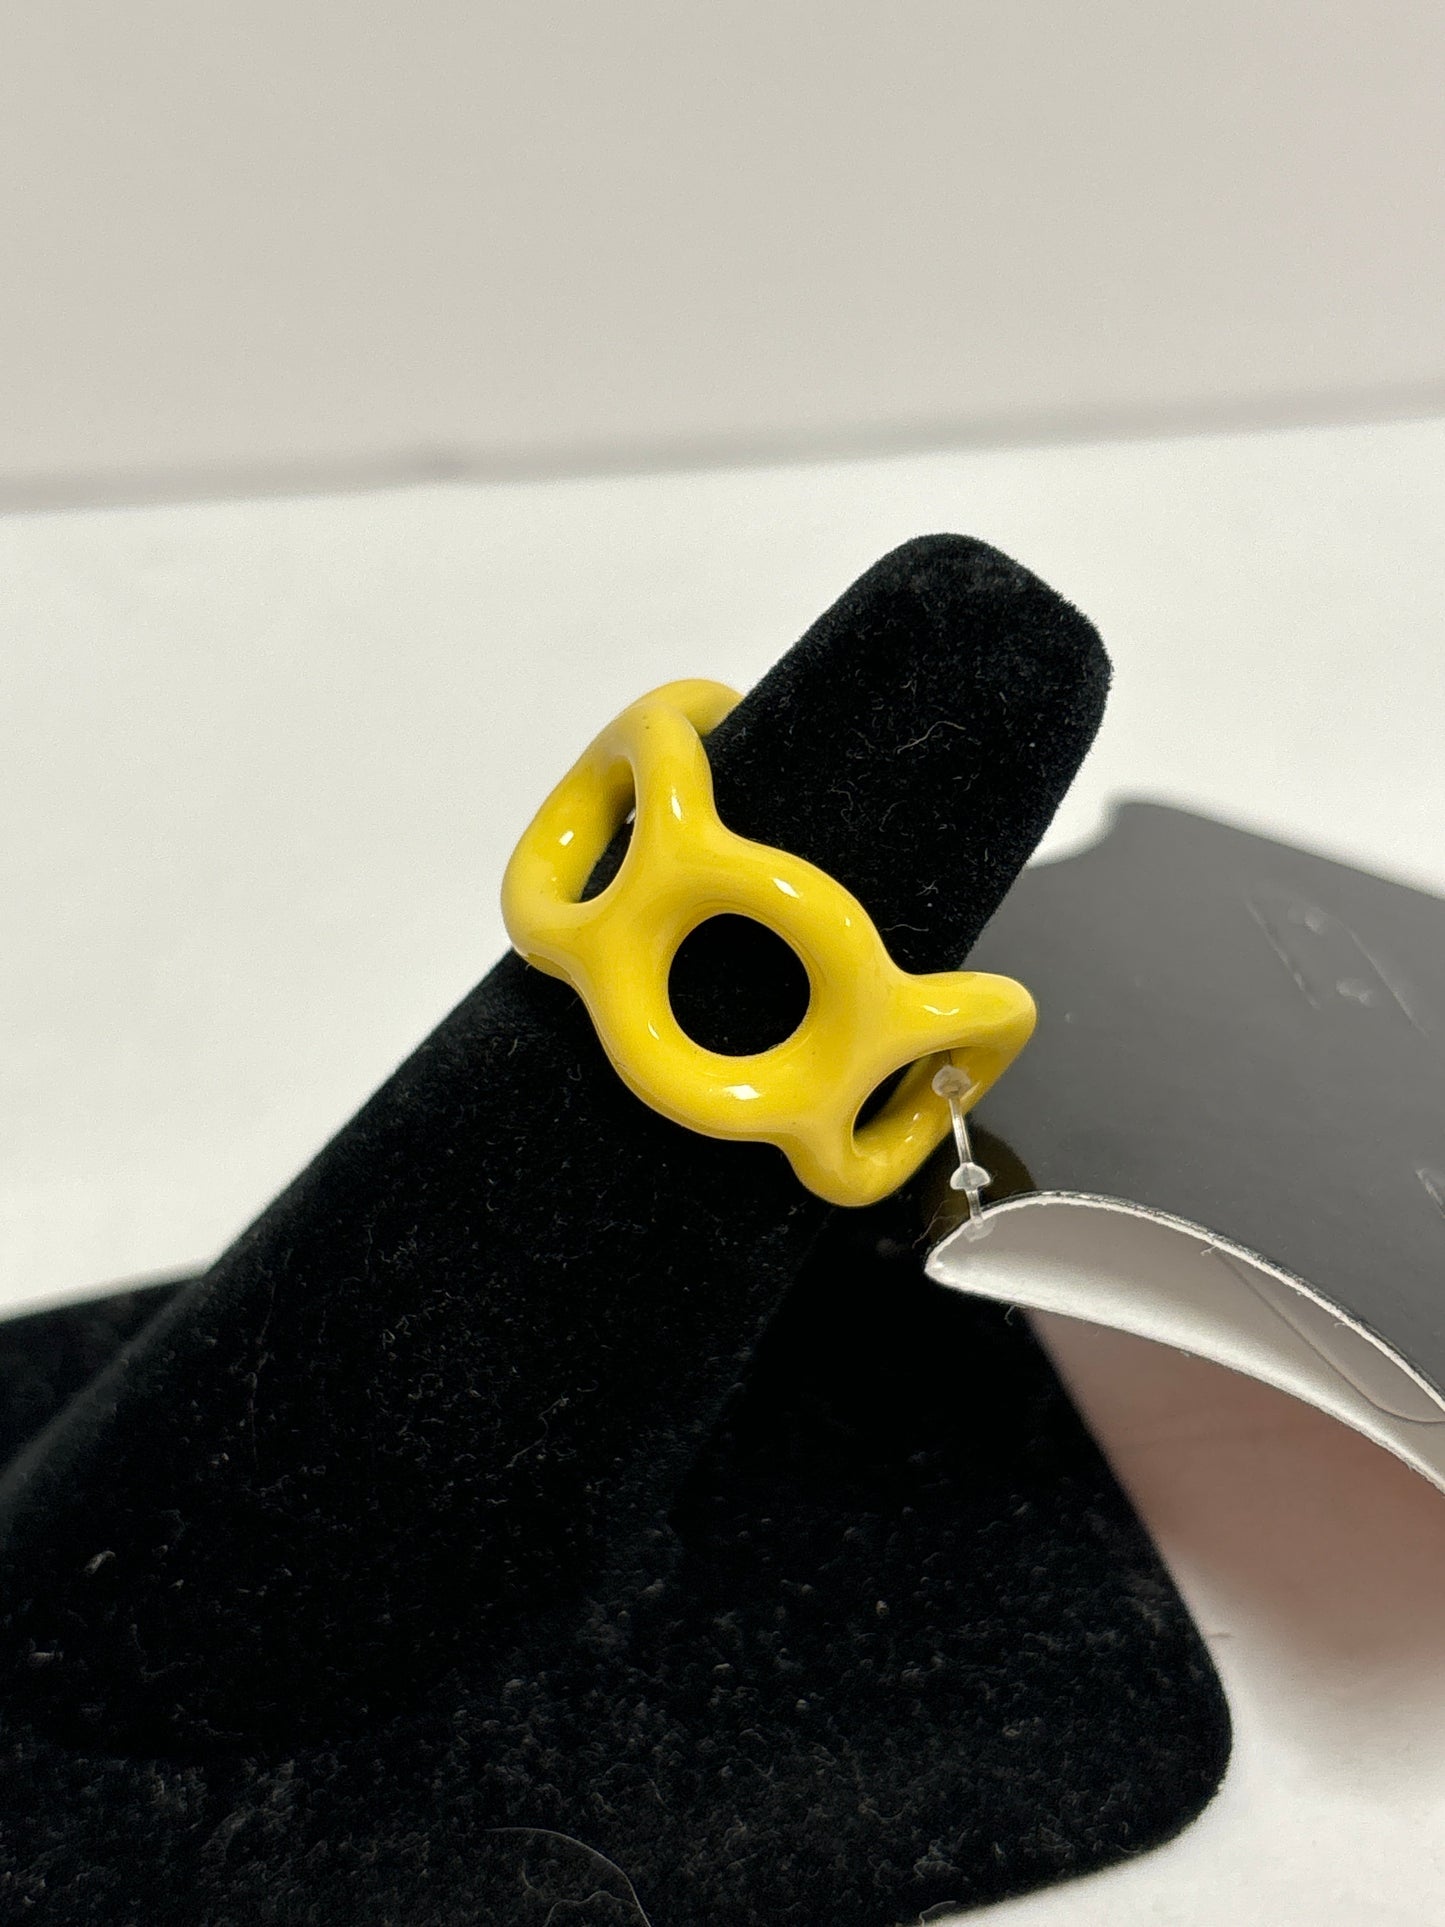 Ring Band By Clothes Mentor  Size: 6.5